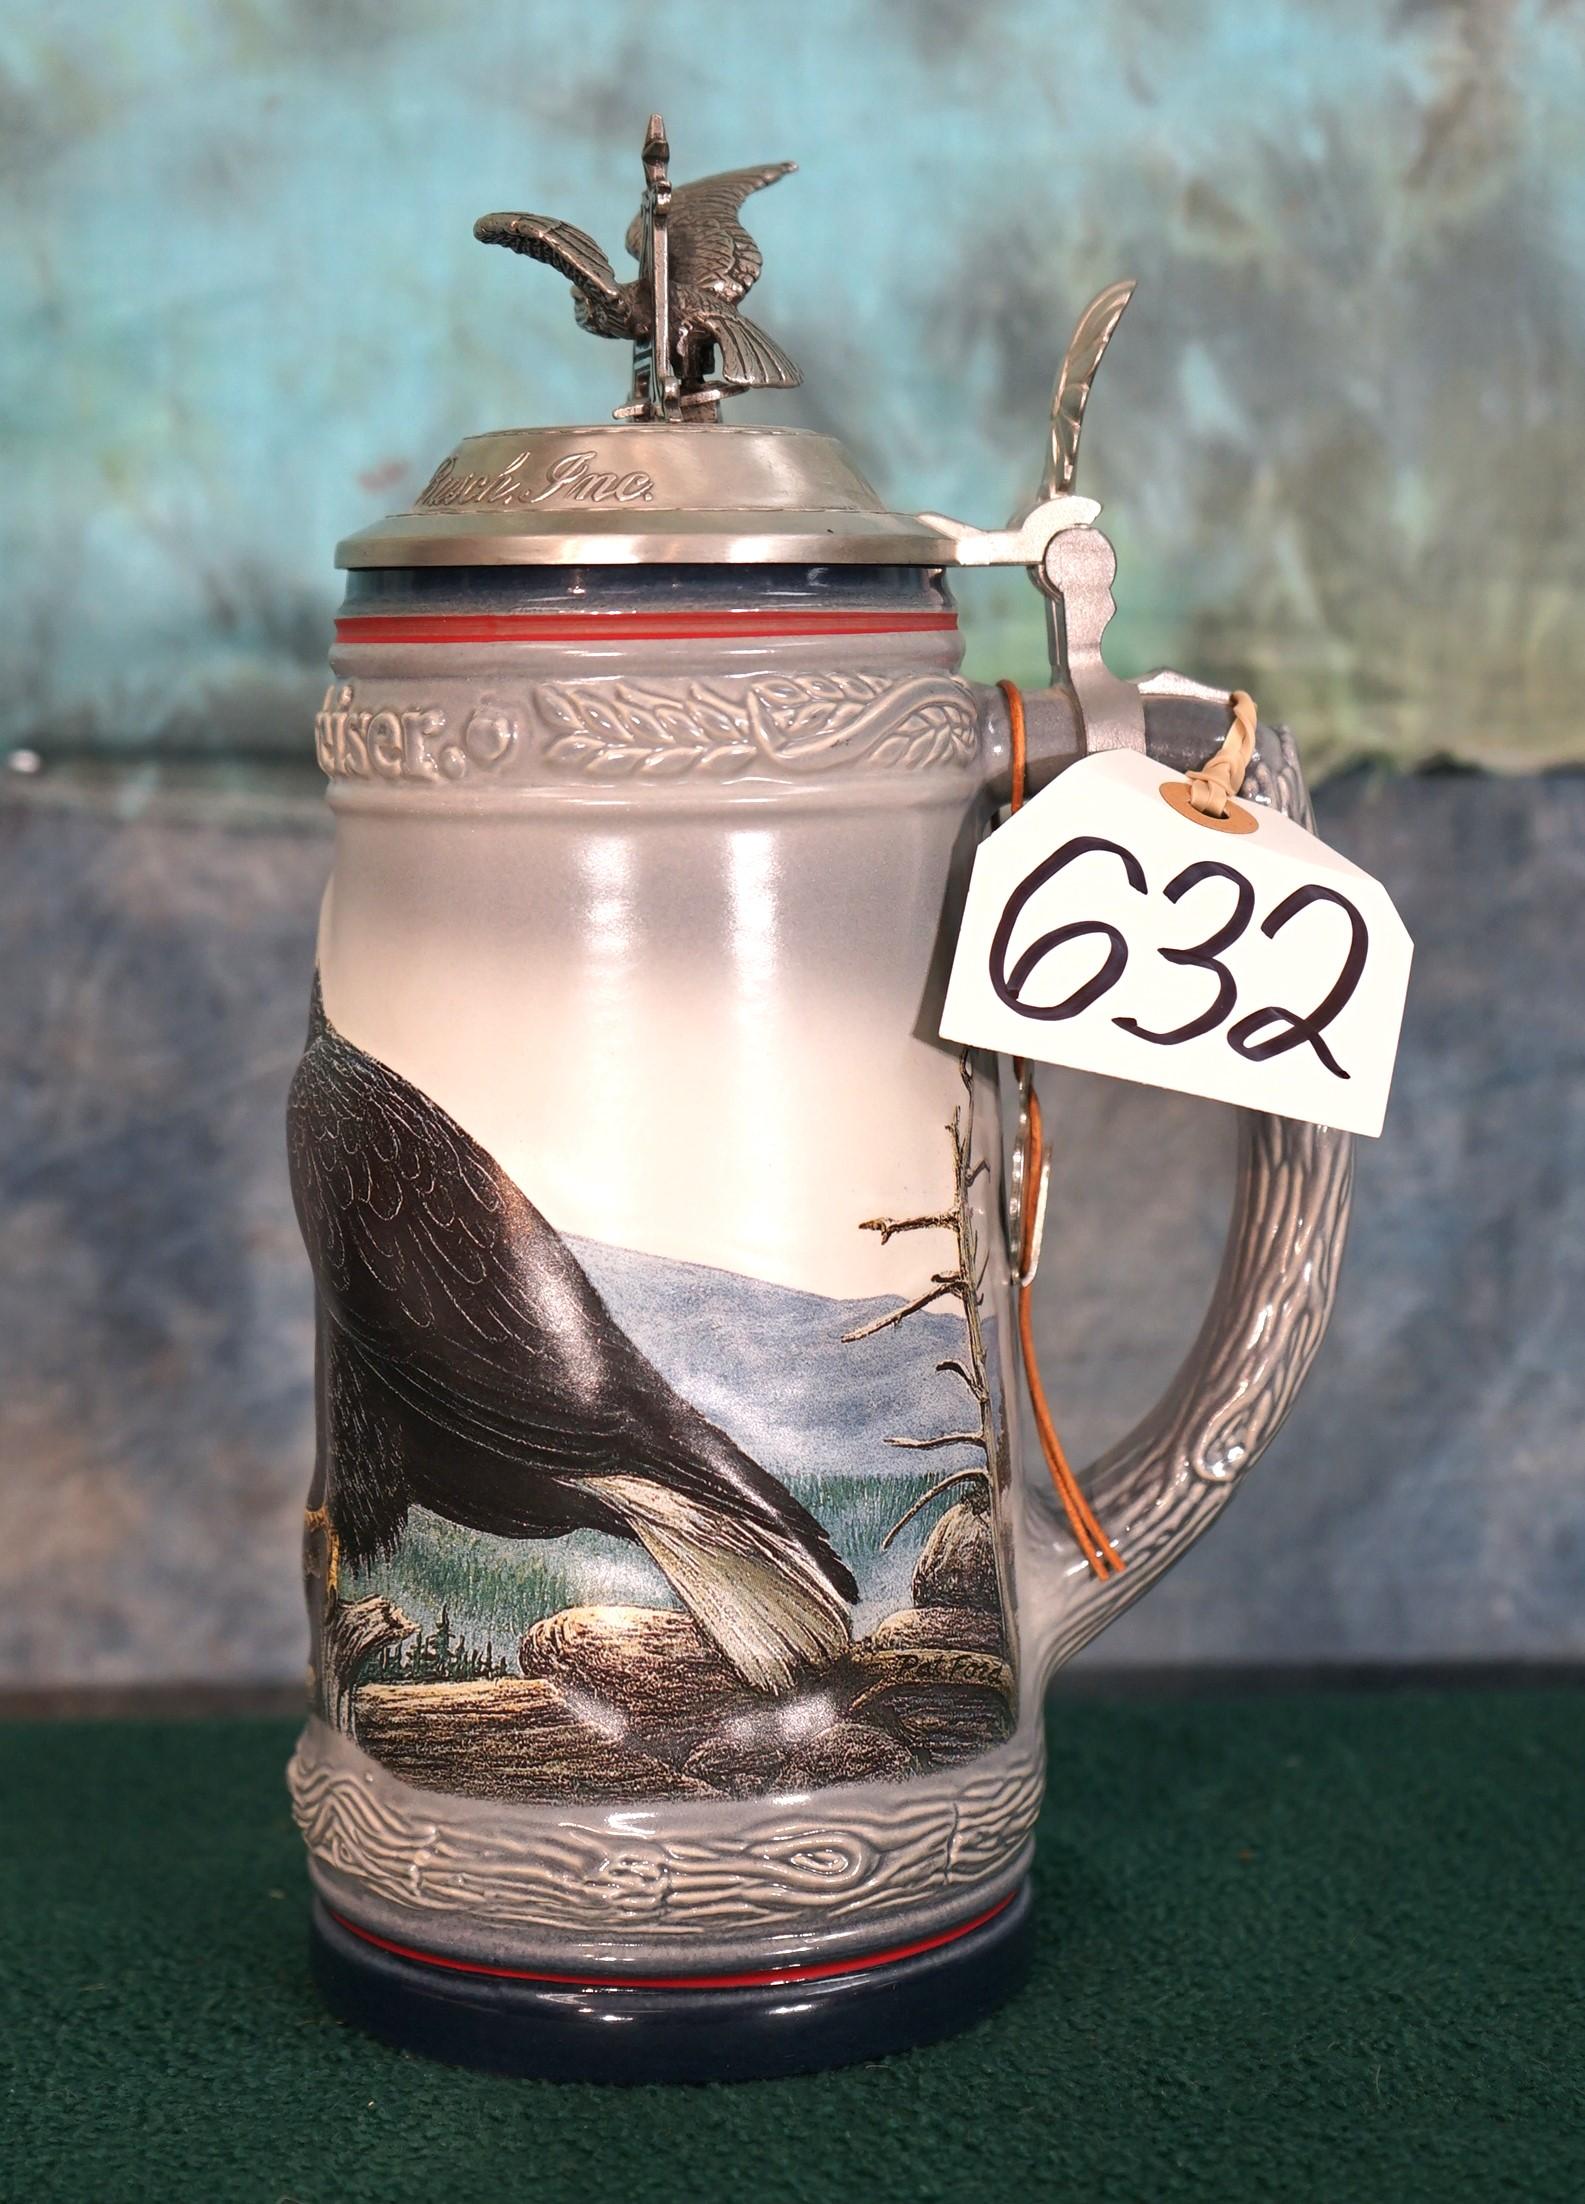 Brand New Budweiser Beer Stein with Bald Eagle Print